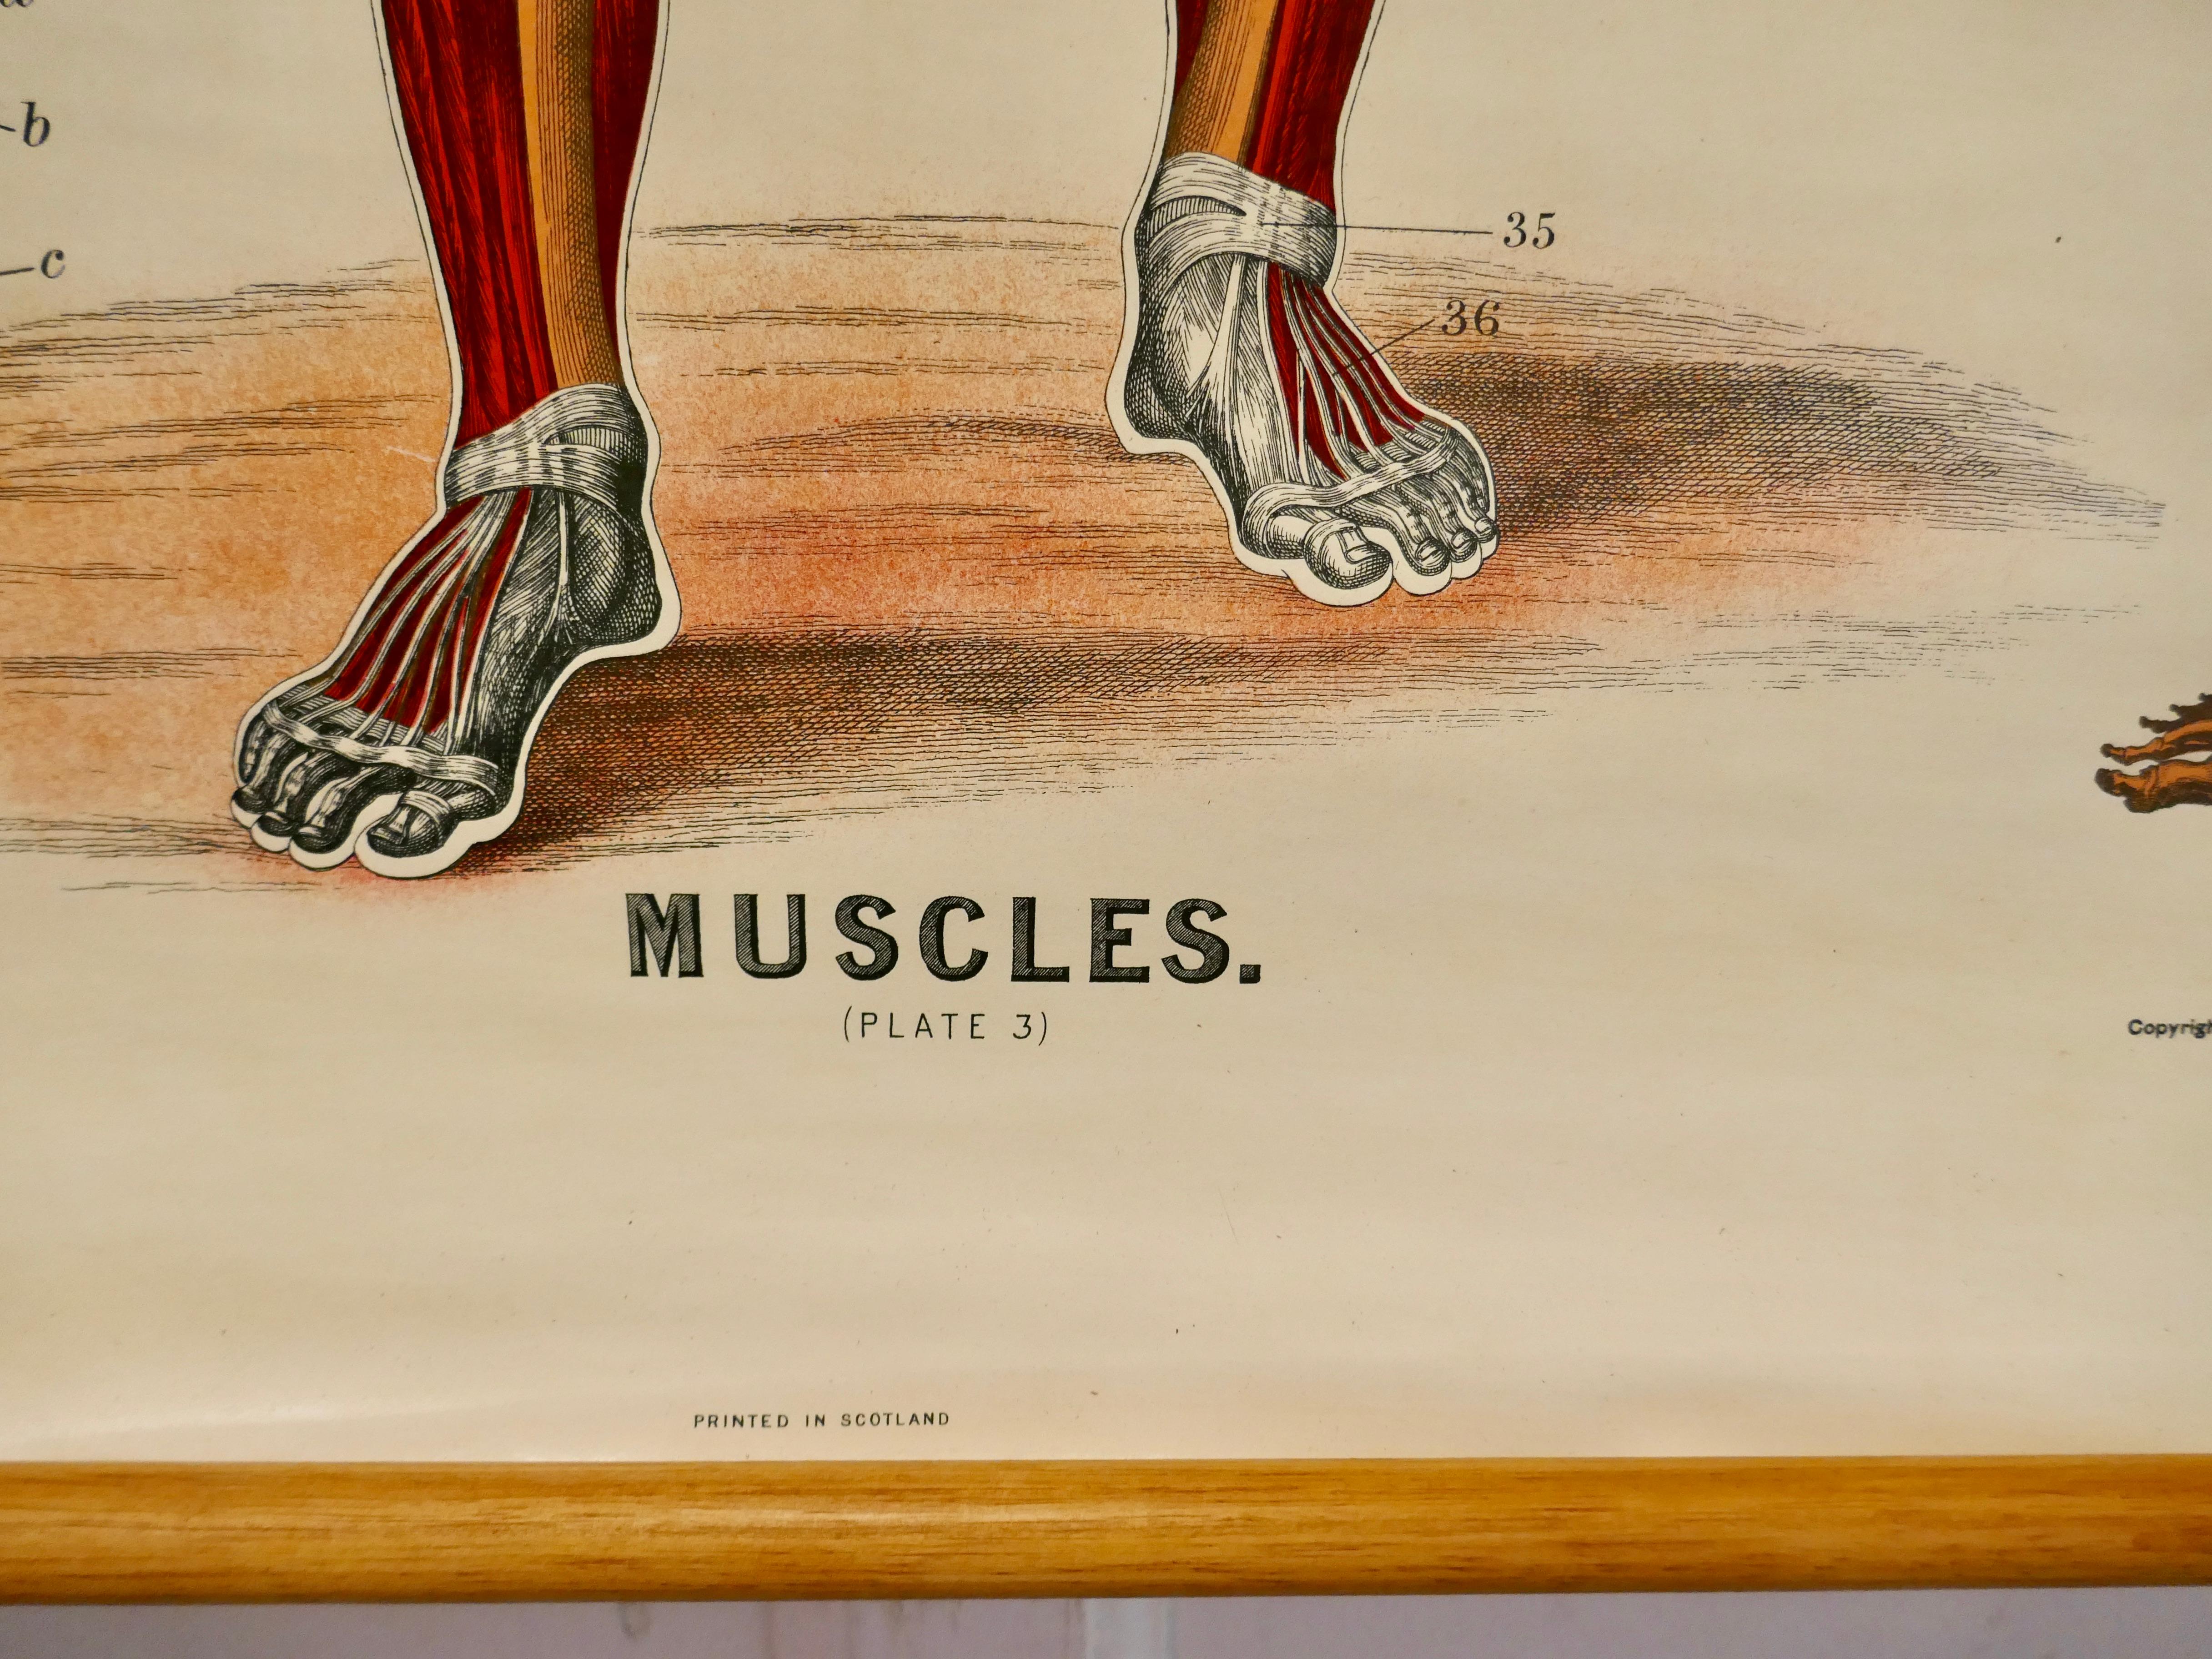 Large university anatomical chart “Muscles” by Turner
 

W&A K Johnston’s Charts of Anatomy and Physiology by Dr William Turner, Professor of Anatomy University of Edinburgh/A J Nystrom & Co US Agents Chicago

This is Plate 3, Muscles, by